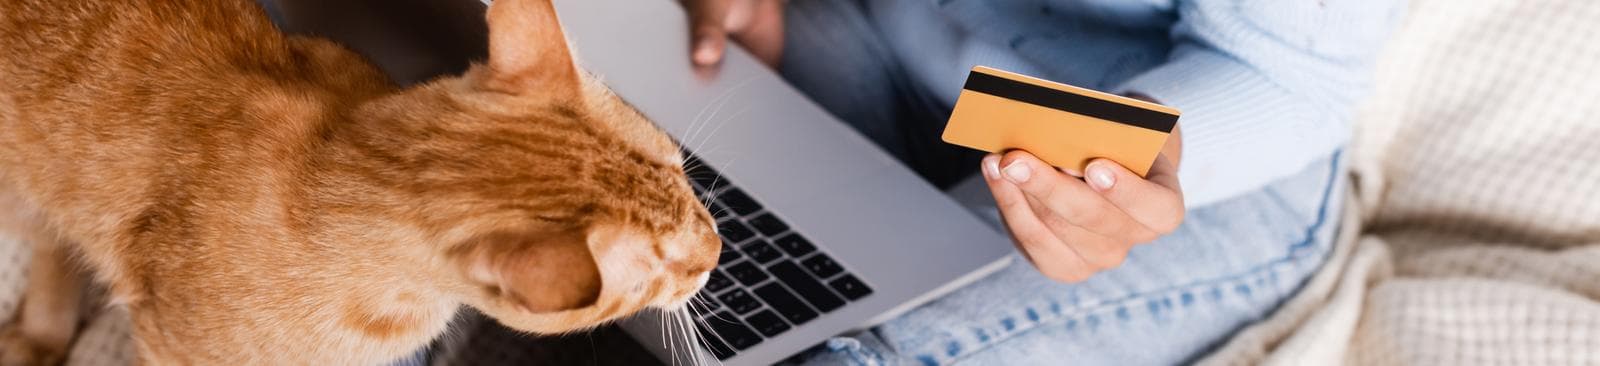 A person paying an online bill on a laptop with a cat next to them